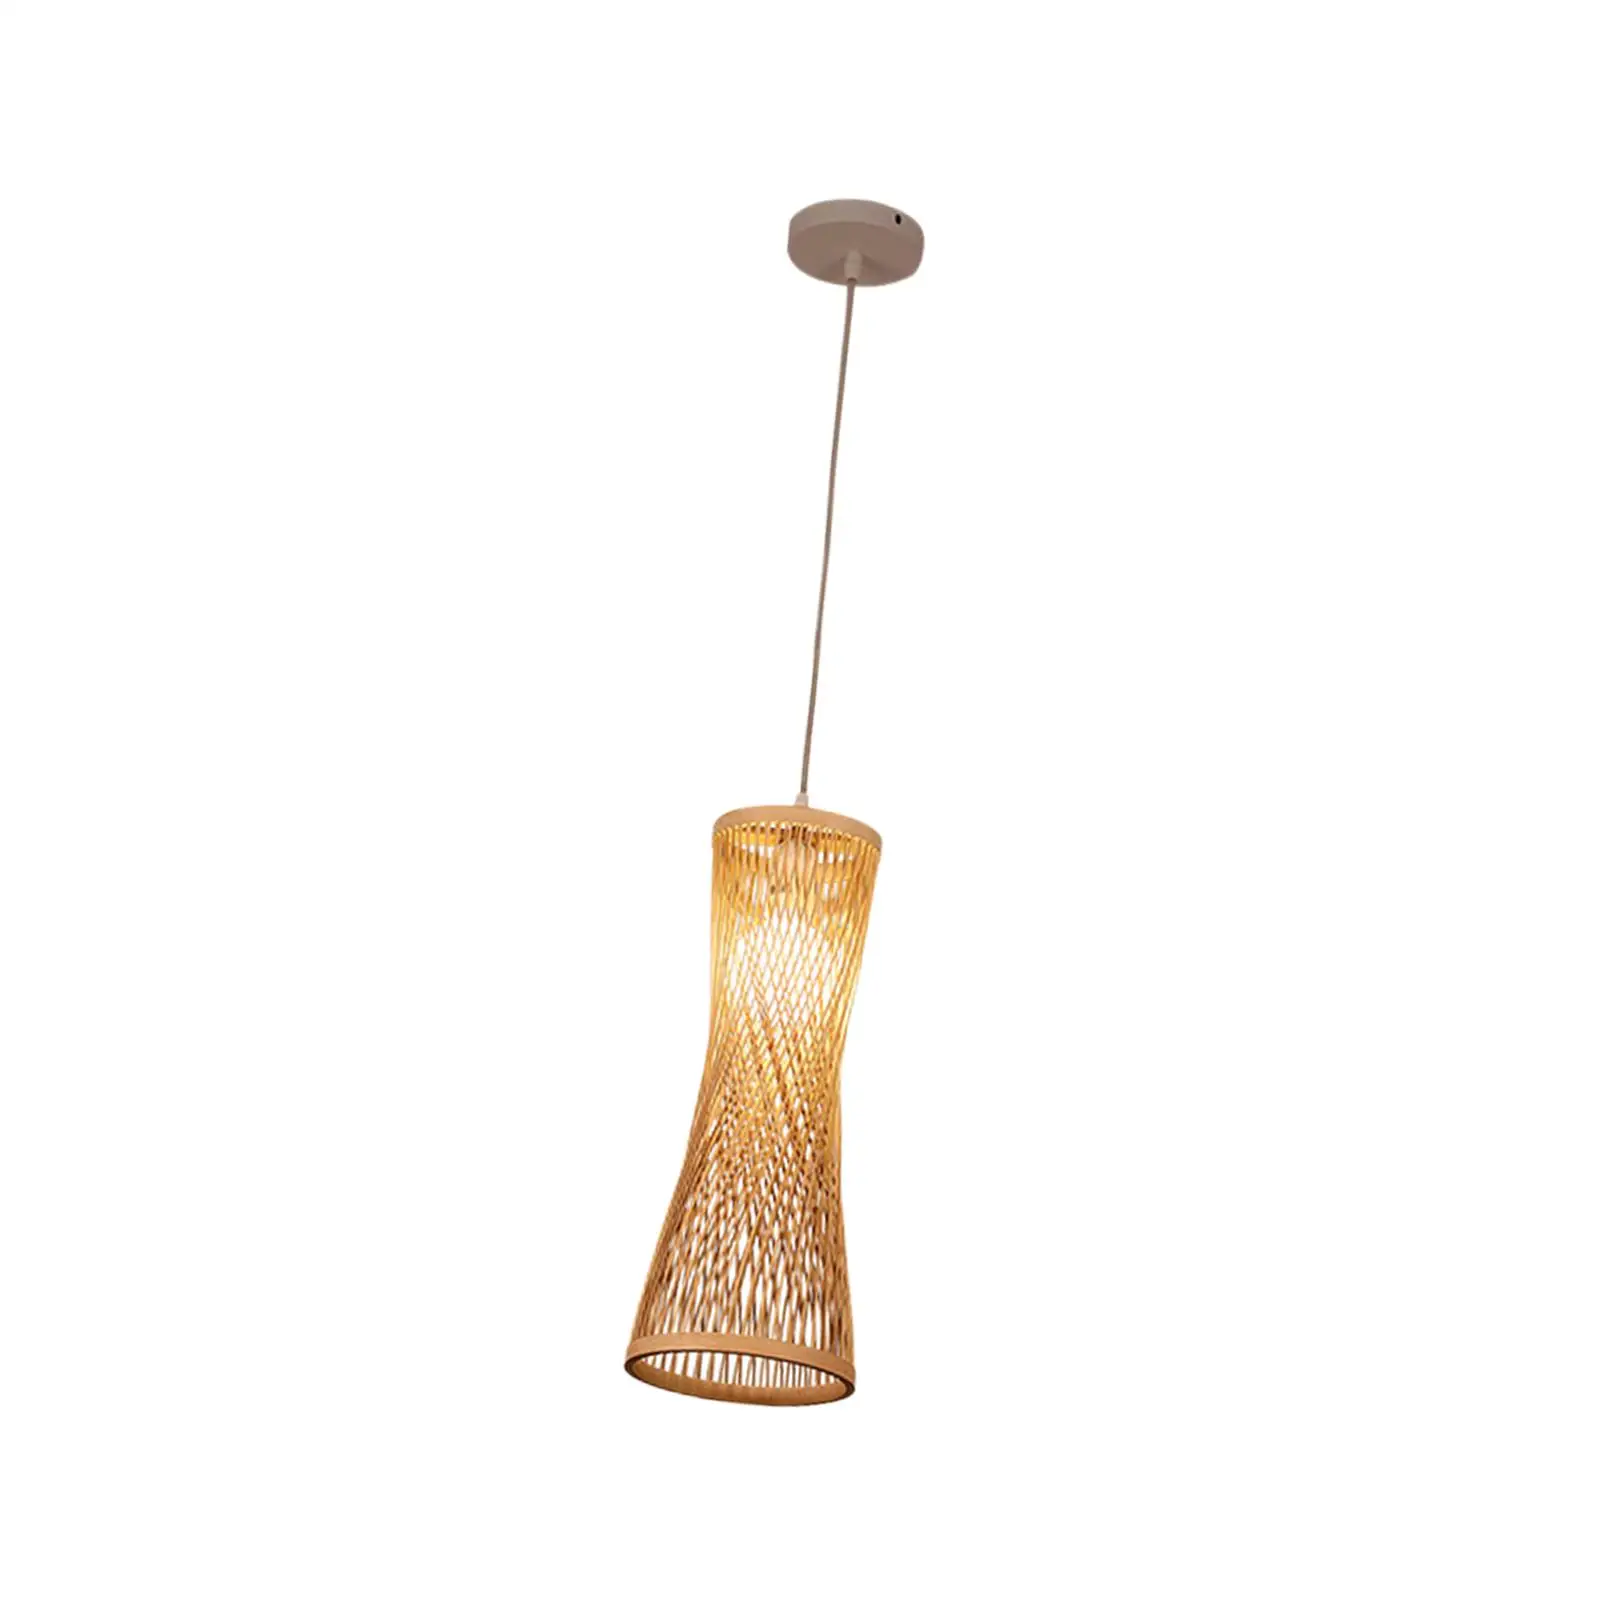 Bamboo Woven Lampshade Handwoven Boho Chandelier Fixture Cover for Living Room